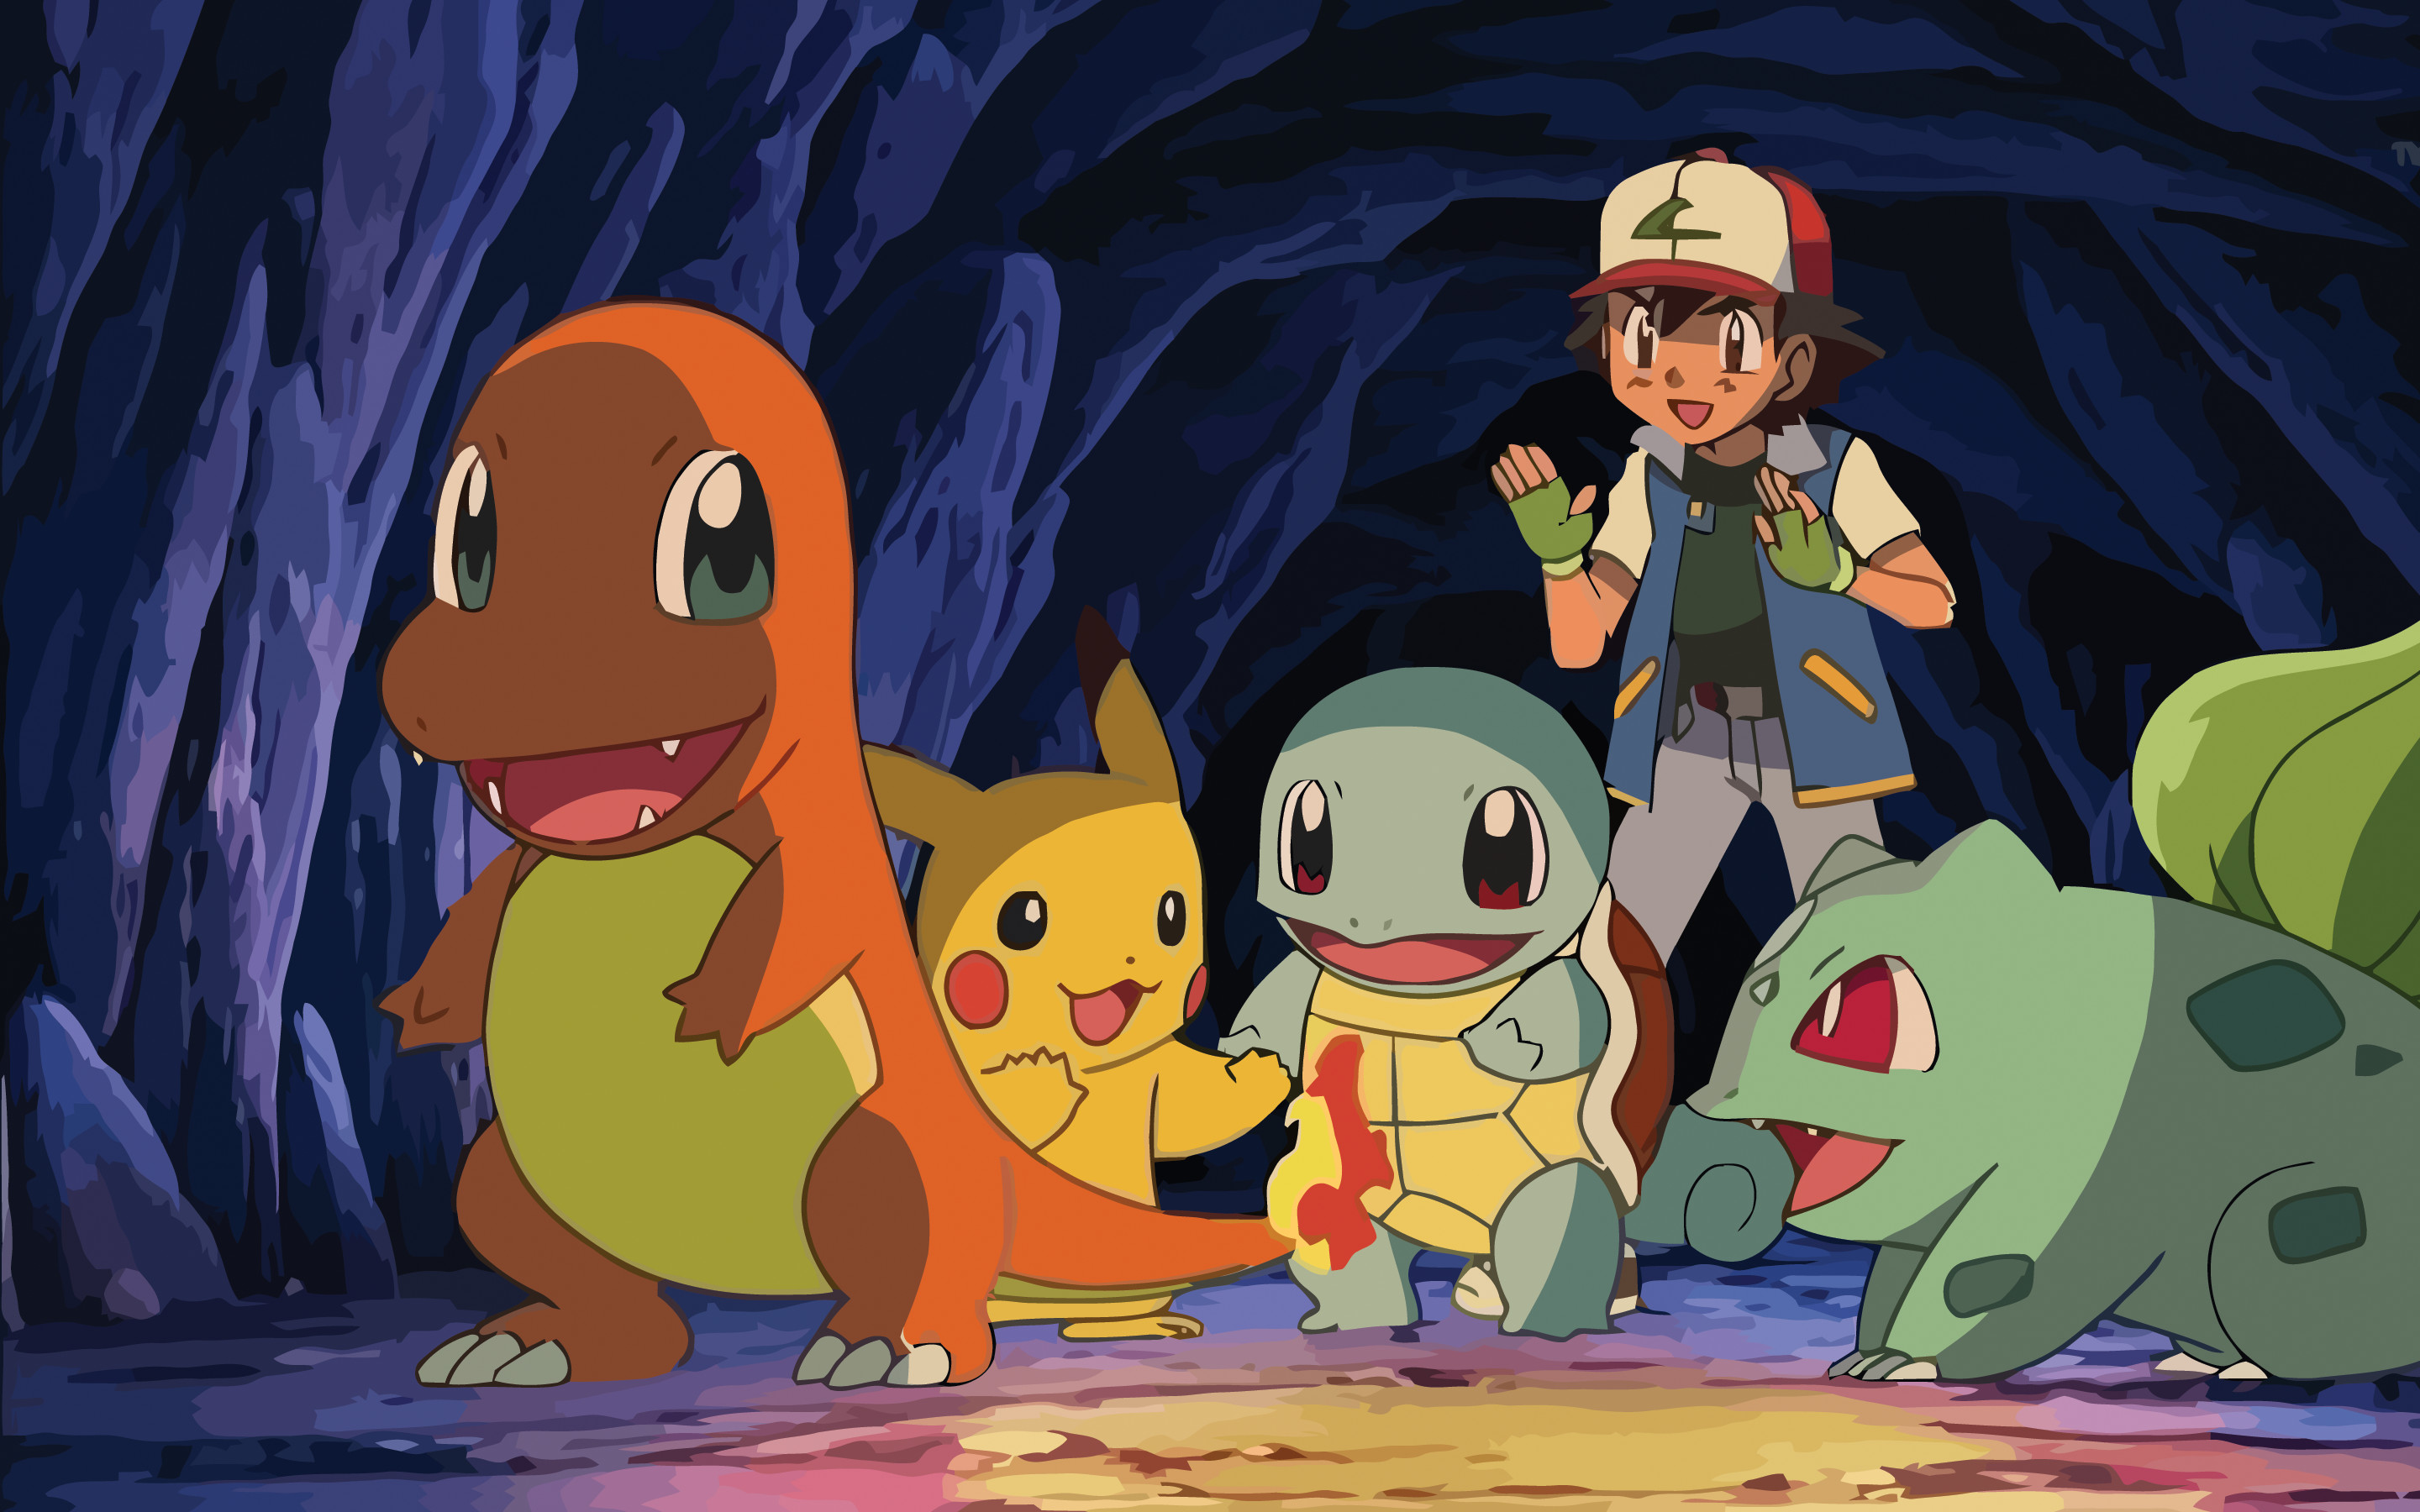 Download Ash Ketchum wallpapers for mobile phone free Ash Ketchum HD  pictures